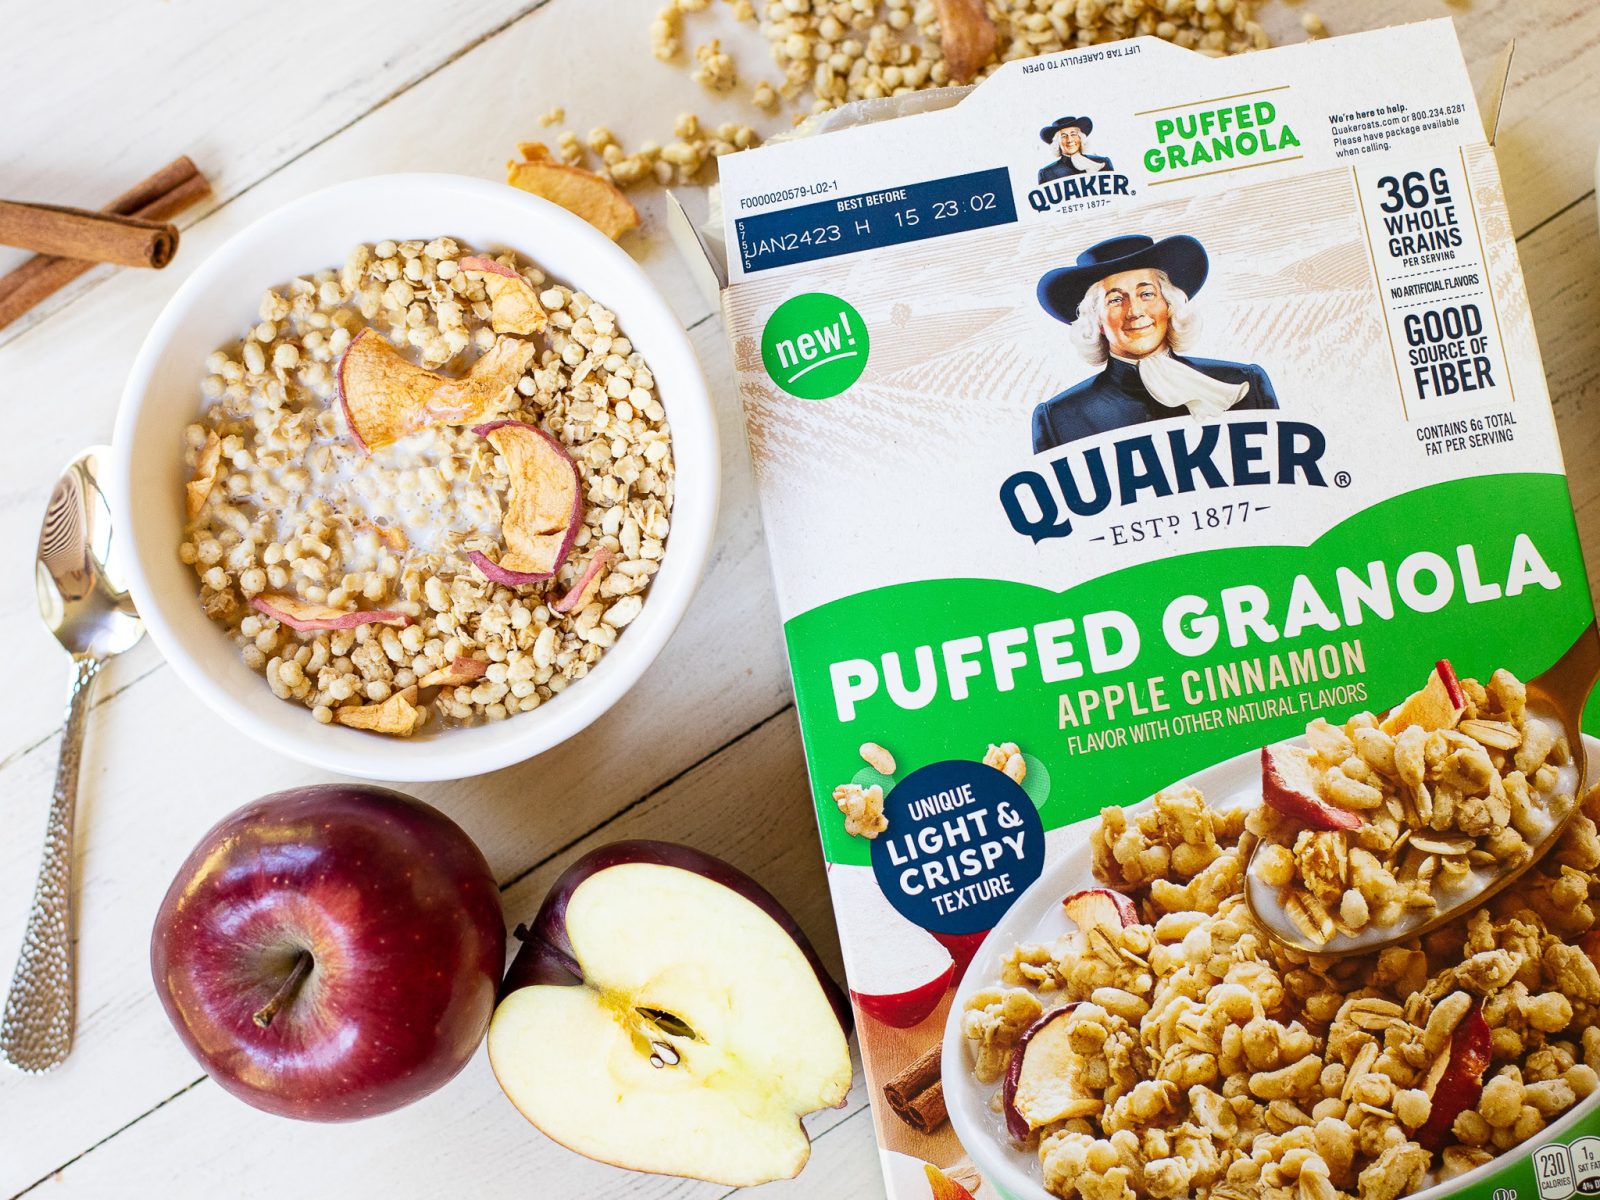 Grab A Box Of Quaker Puffed Granola For FREE At Kroger